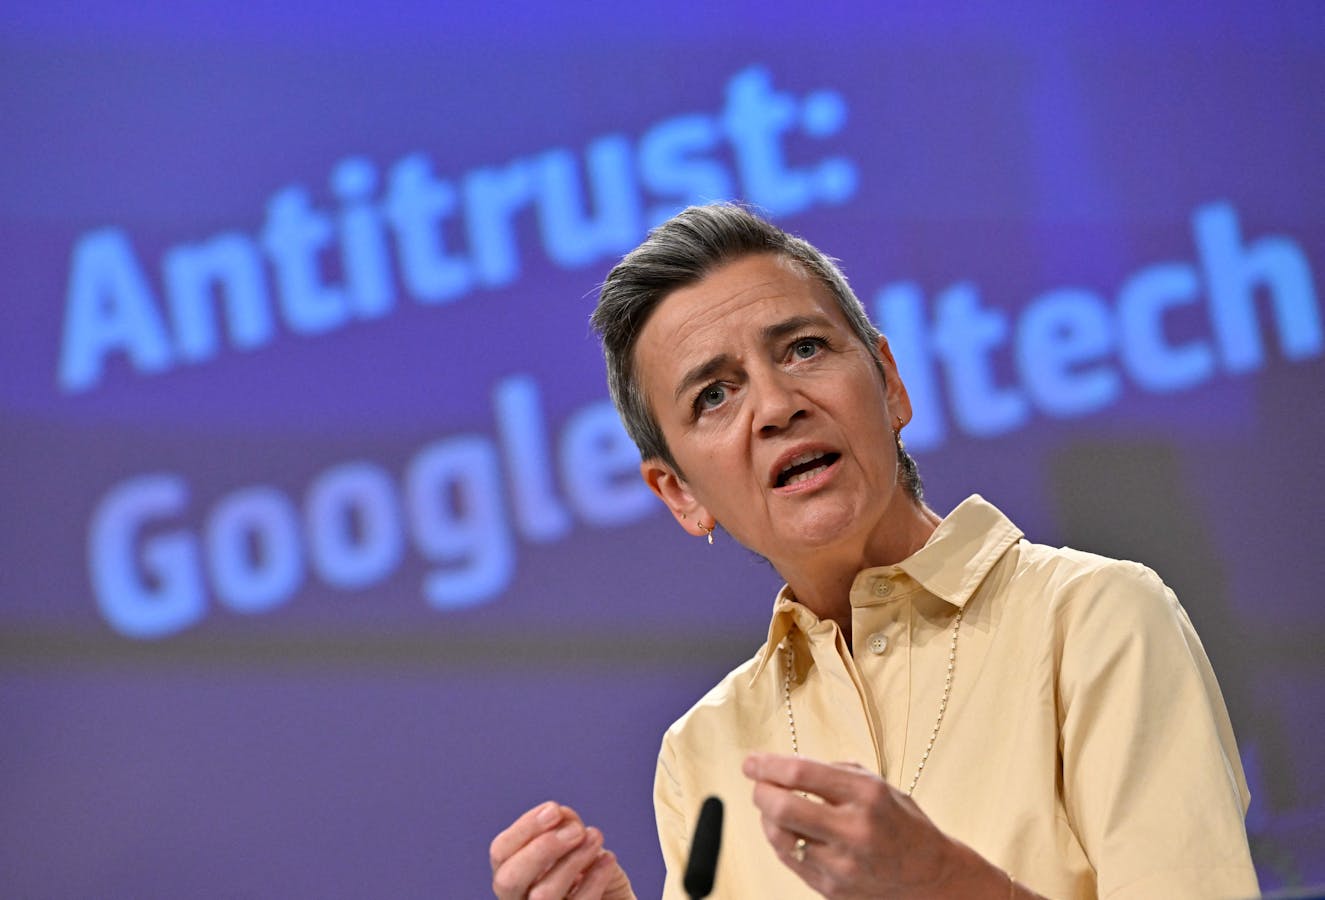 Margrethe Vestager, European Commission's Executive Vice-President who leads competition policy. Photo by Getty.